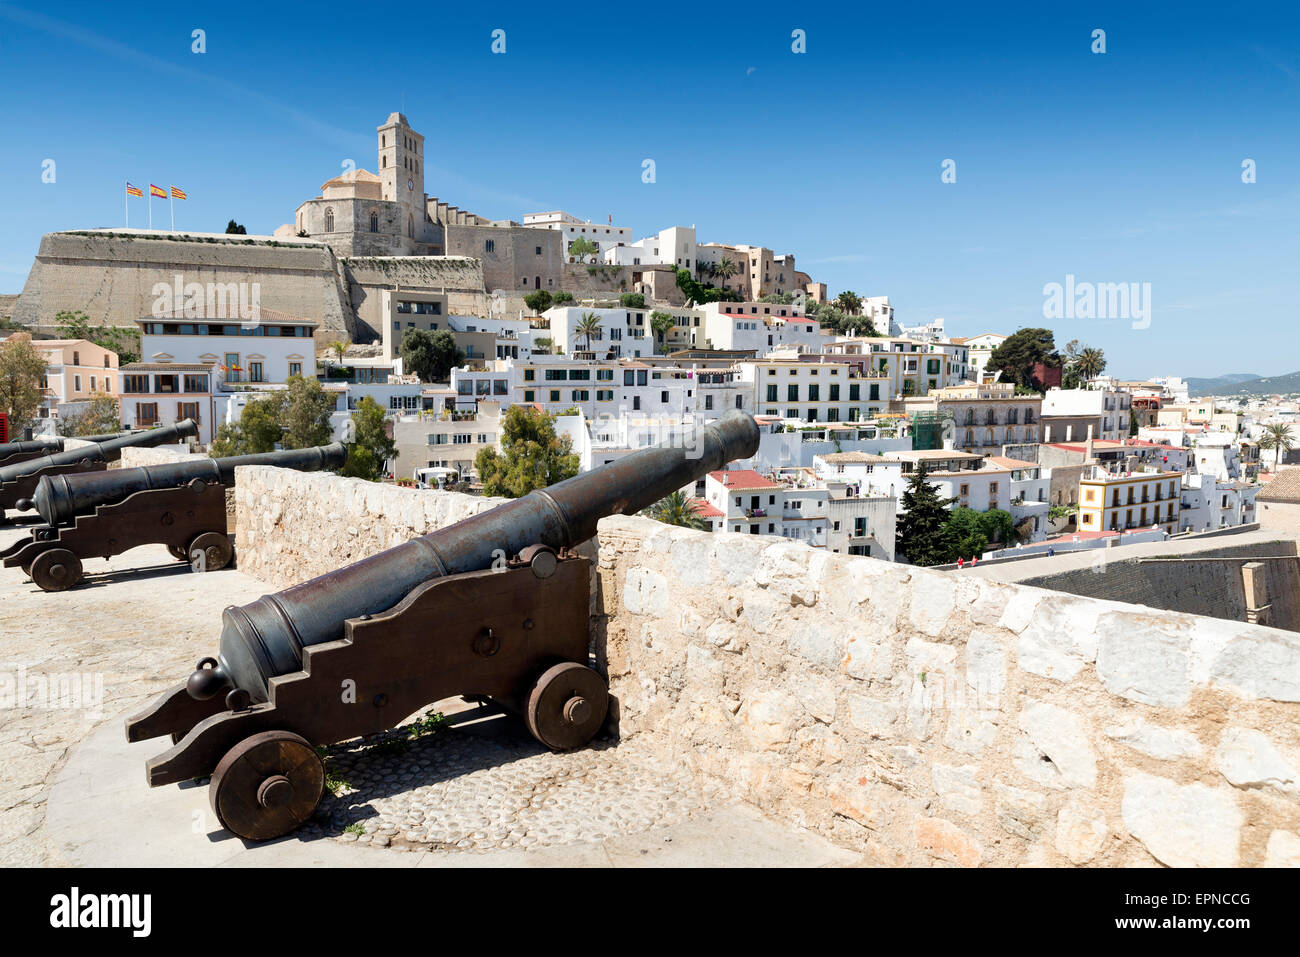 Cathedral and old town. Ibiza, Balearic Islands. Spain Stock Photo